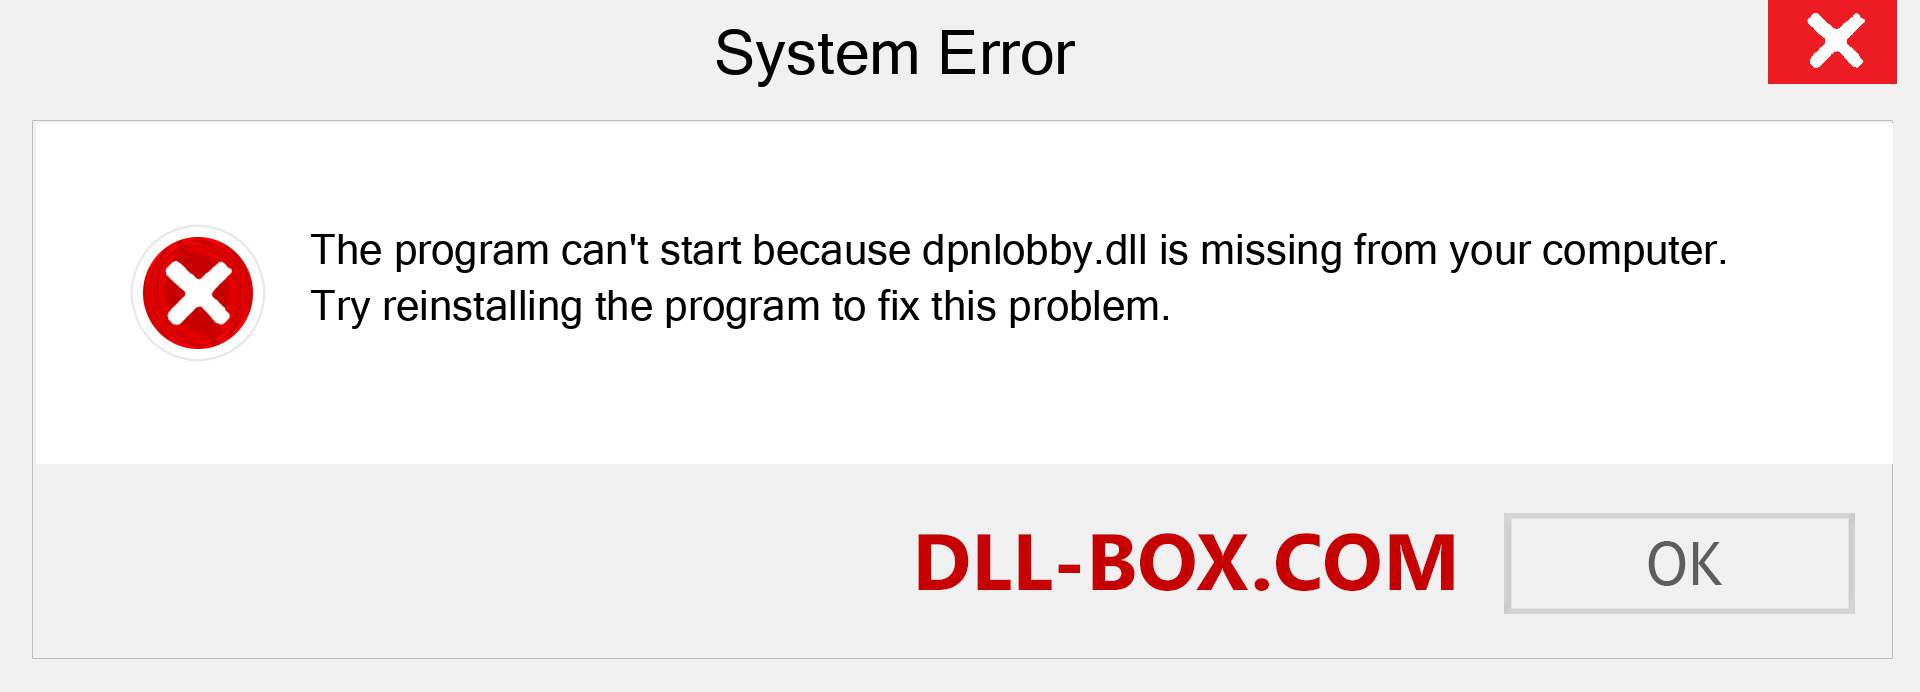  dpnlobby.dll file is missing?. Download for Windows 7, 8, 10 - Fix  dpnlobby dll Missing Error on Windows, photos, images